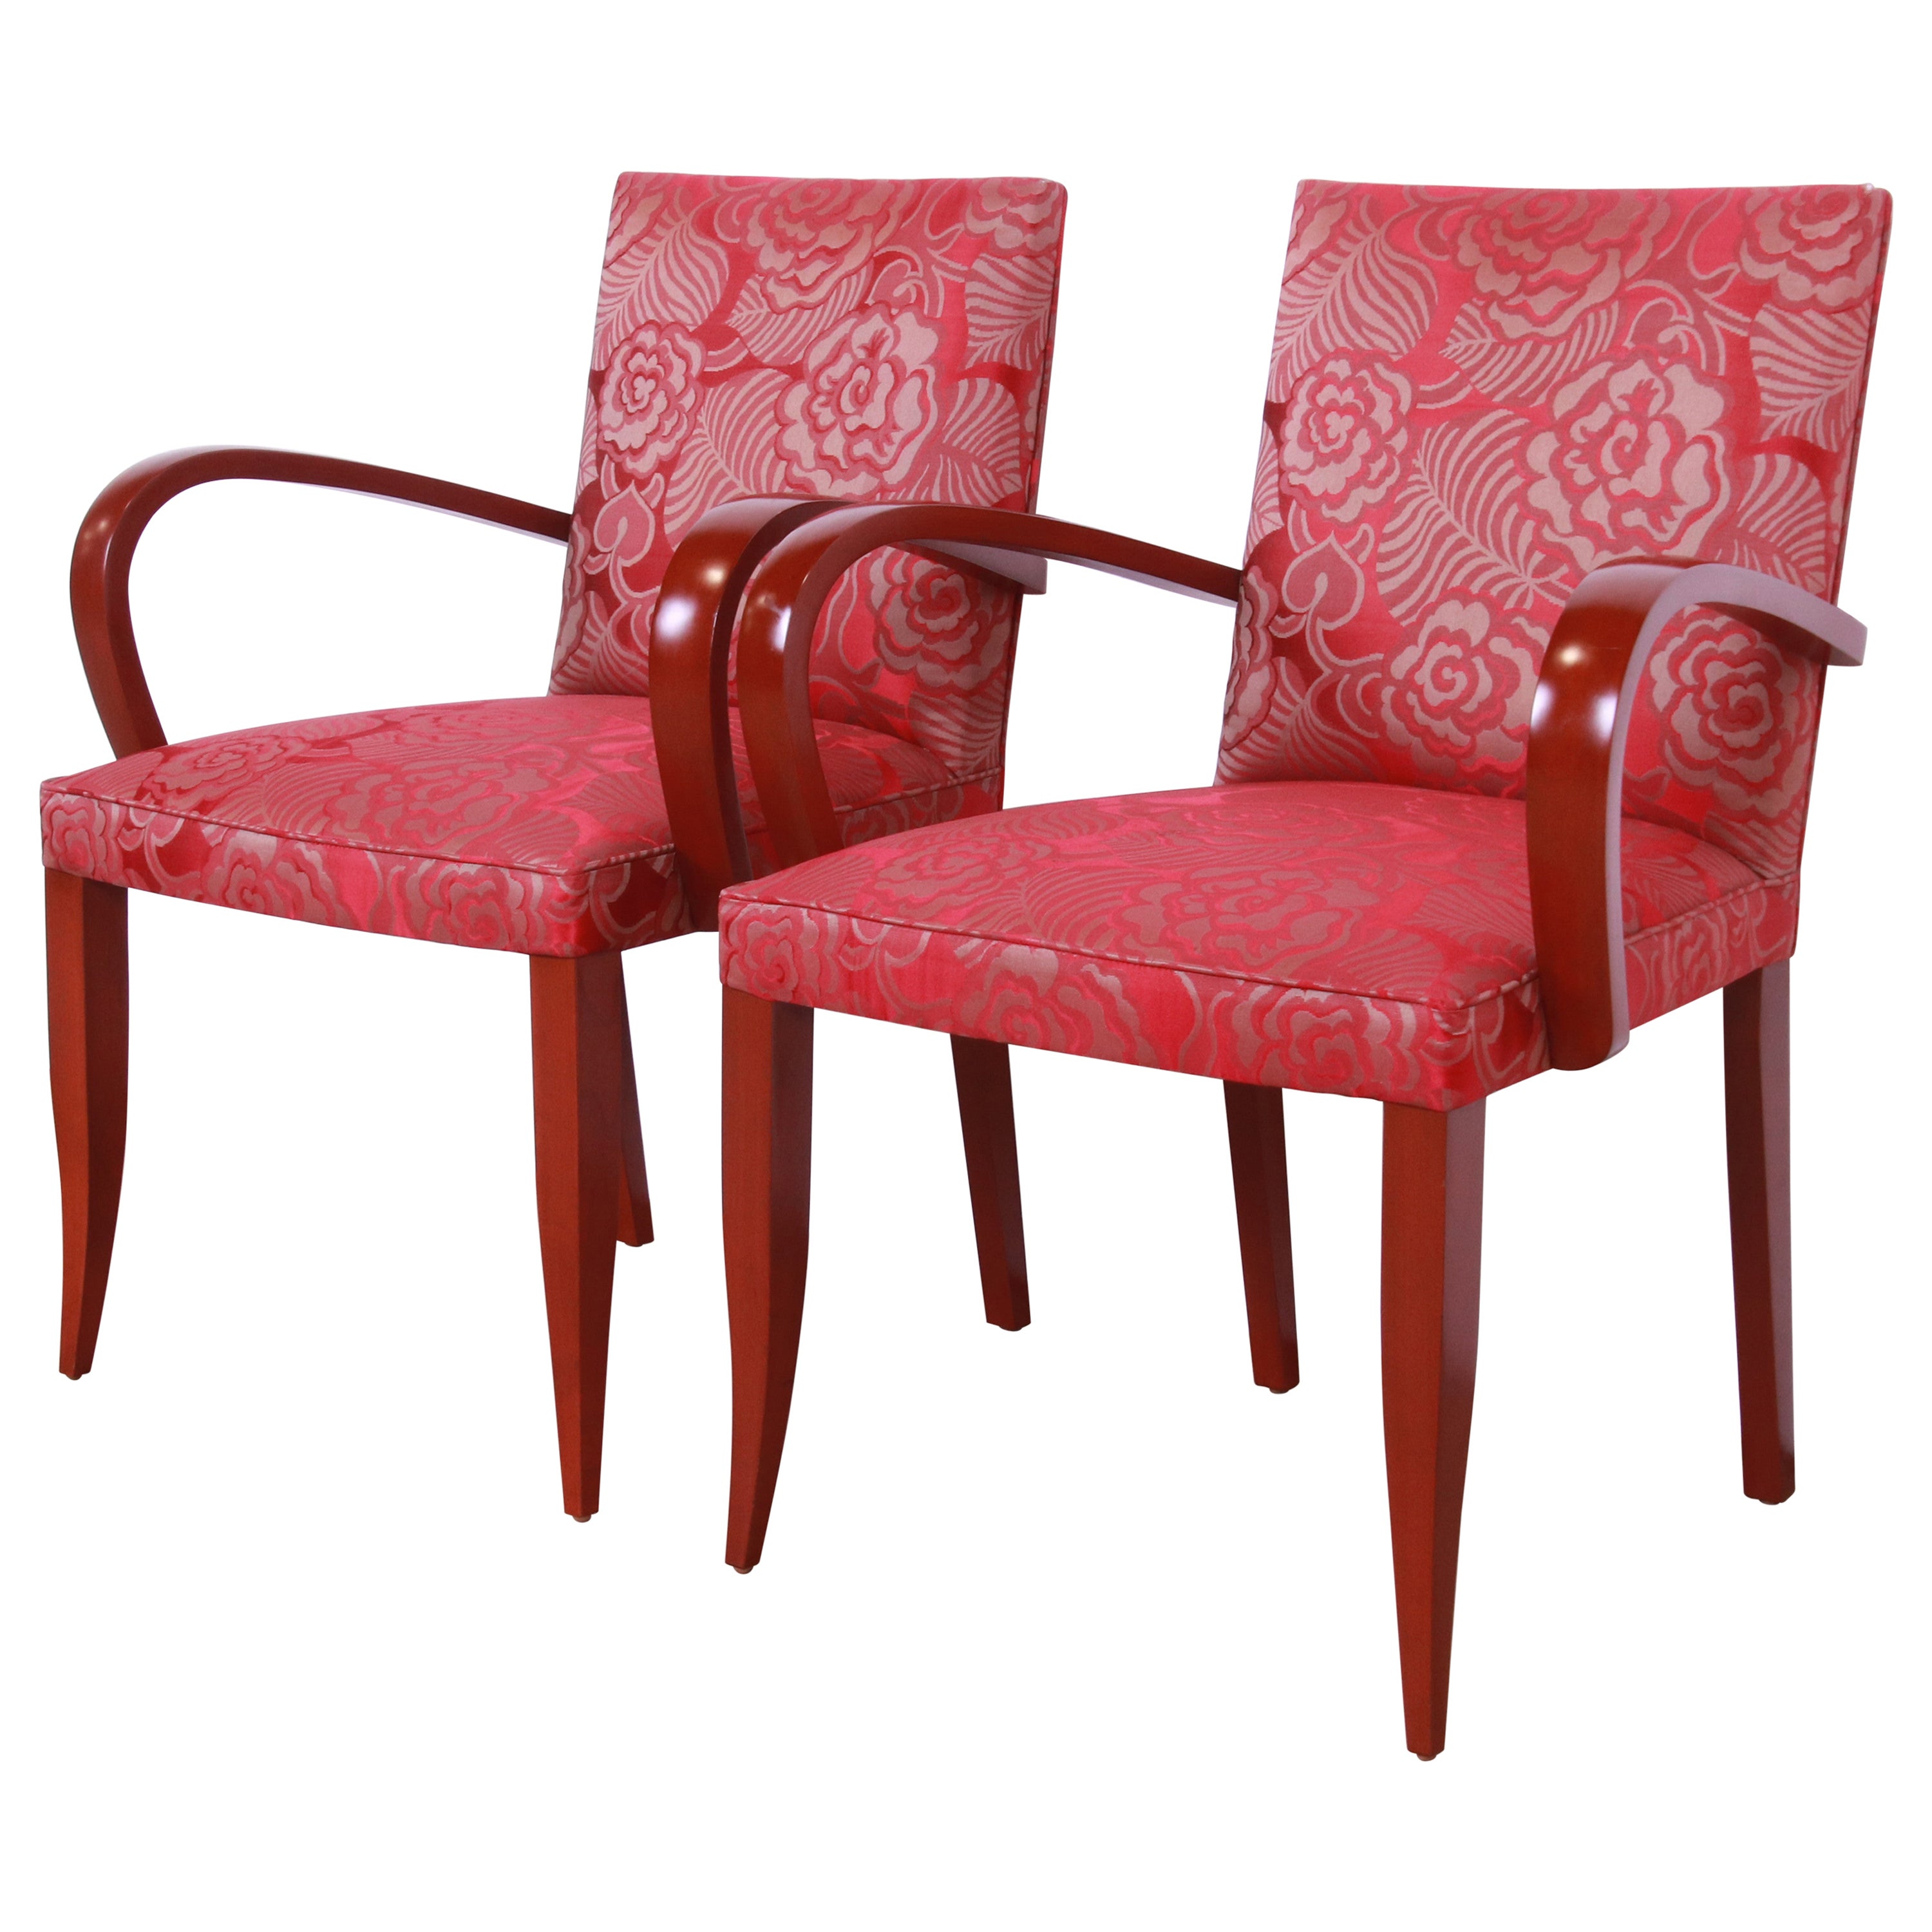 Dakota Jackson "PFM" Modern Upholstered Club Chairs or Dining Armchairs, Pair For Sale